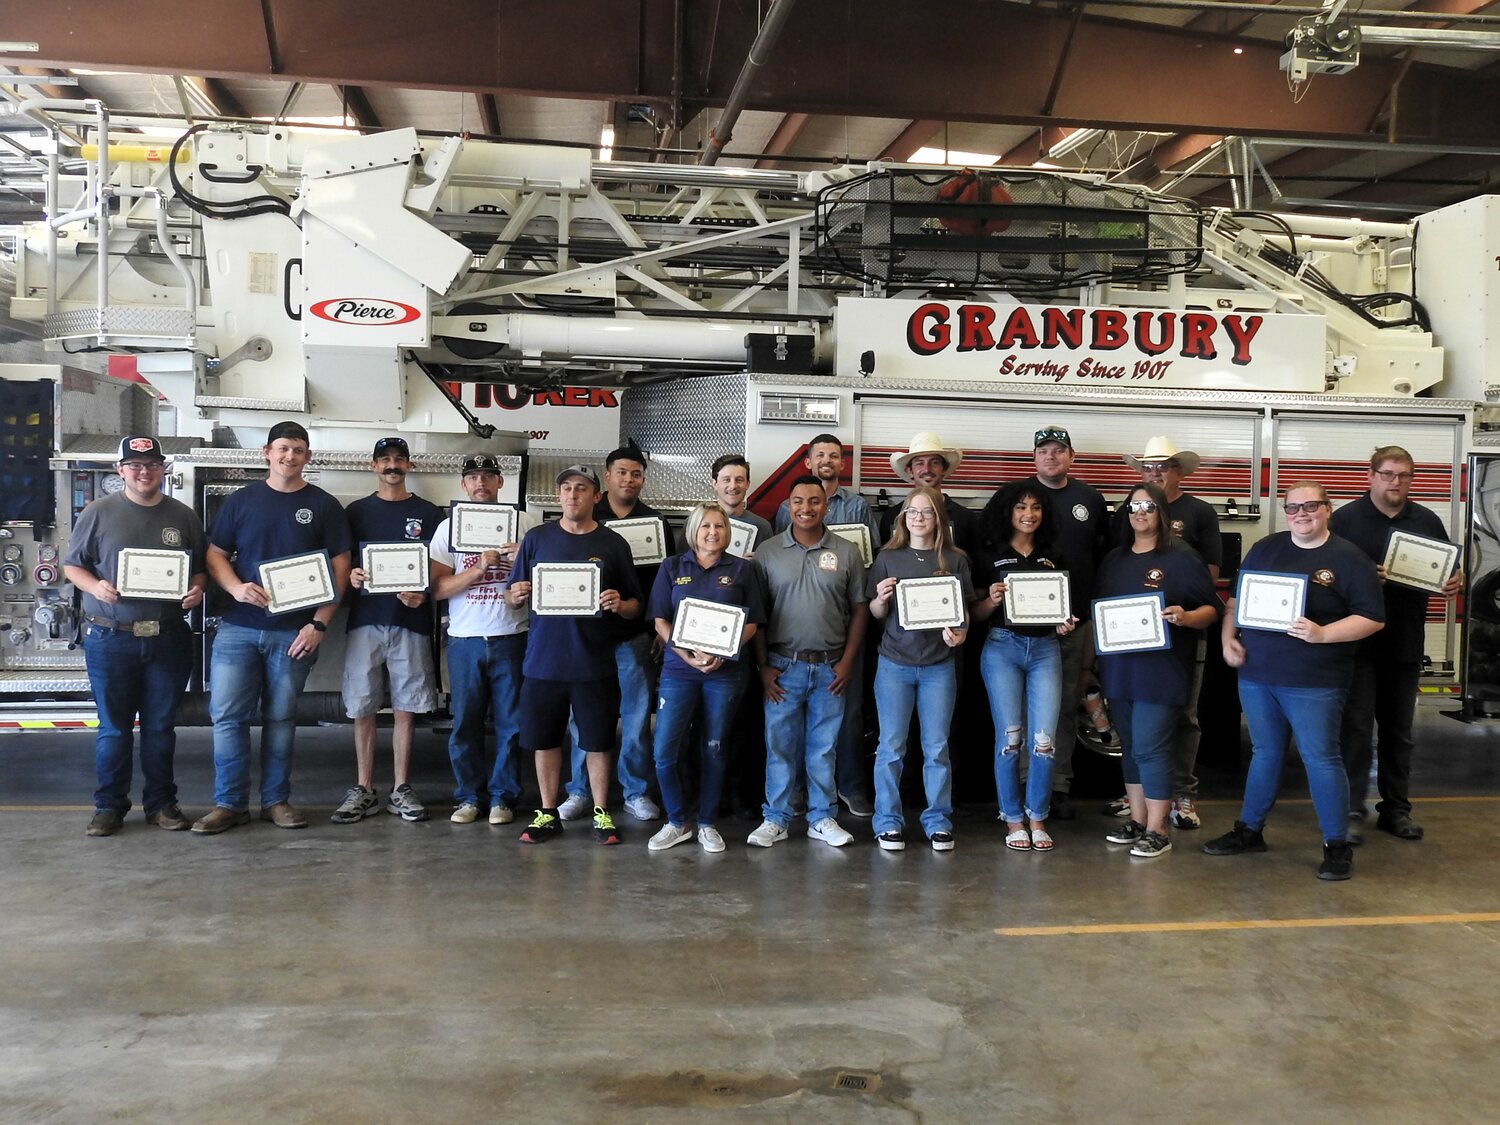 Training Lieutenant Diego Guerrero, front row center, in gray shirt, smiles proudly while standing among the Granbury Volunteer Fire Department Fire Academy’s newest graduates. Seventeen new volunteer firefighters graduated from the Academy on June 3. COURTESY OF GVFD